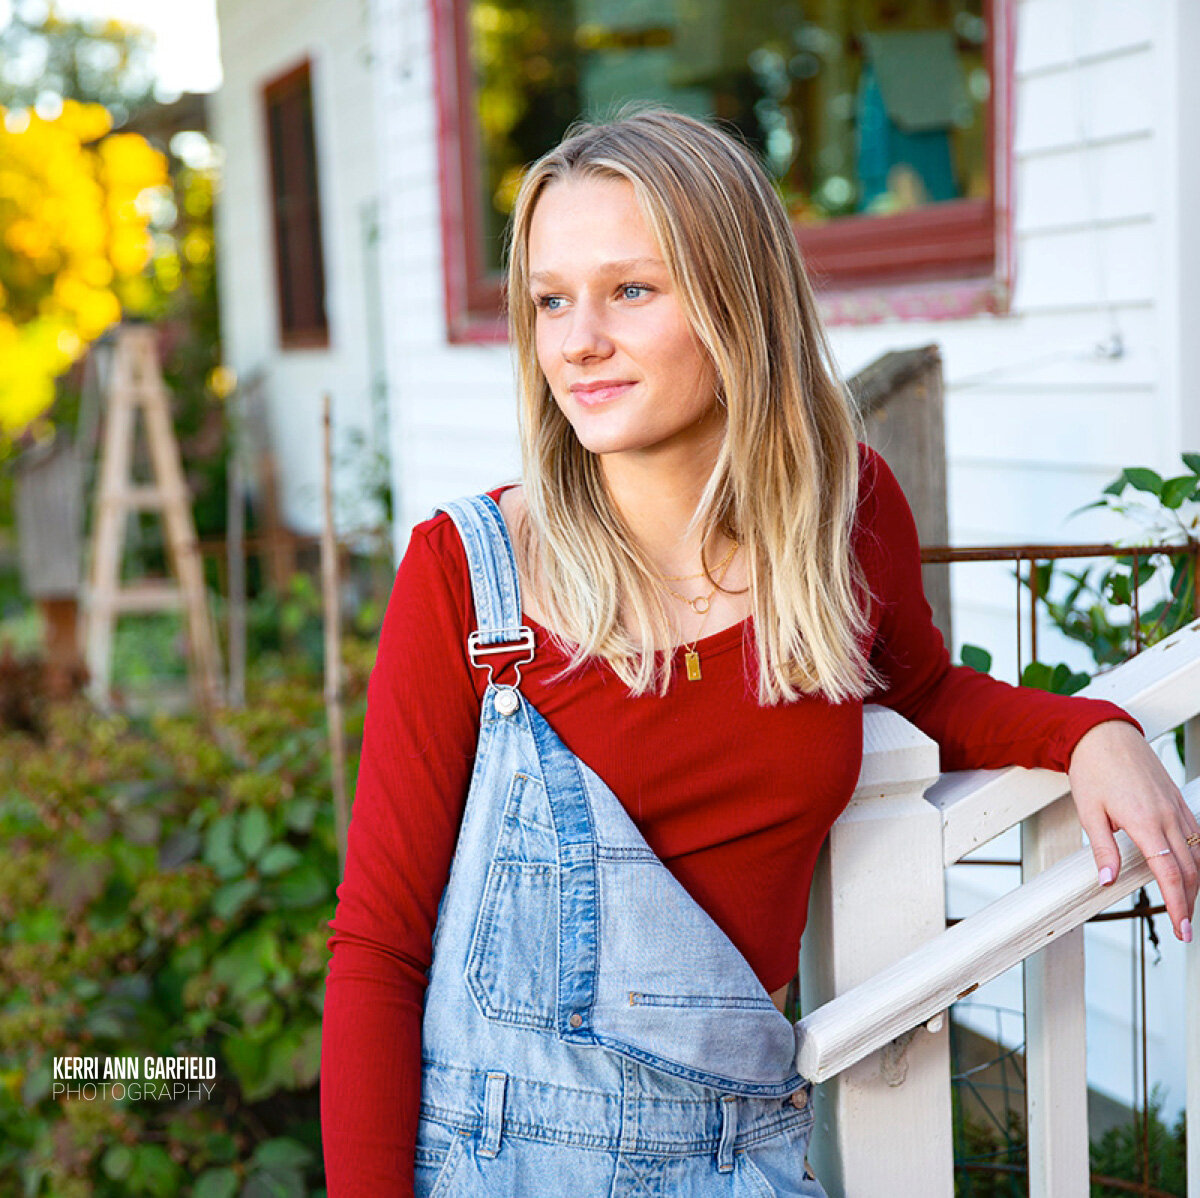 Happy to share one of Rylee's looks from her Senior Photo Session last fall. I love the pop of red against her jean overalls - such a fun look! Thanks, Rylee - you were awesome to photograph!

 @keriwinscott  Keri Pedersen Winscott  @ryleewinscott 

